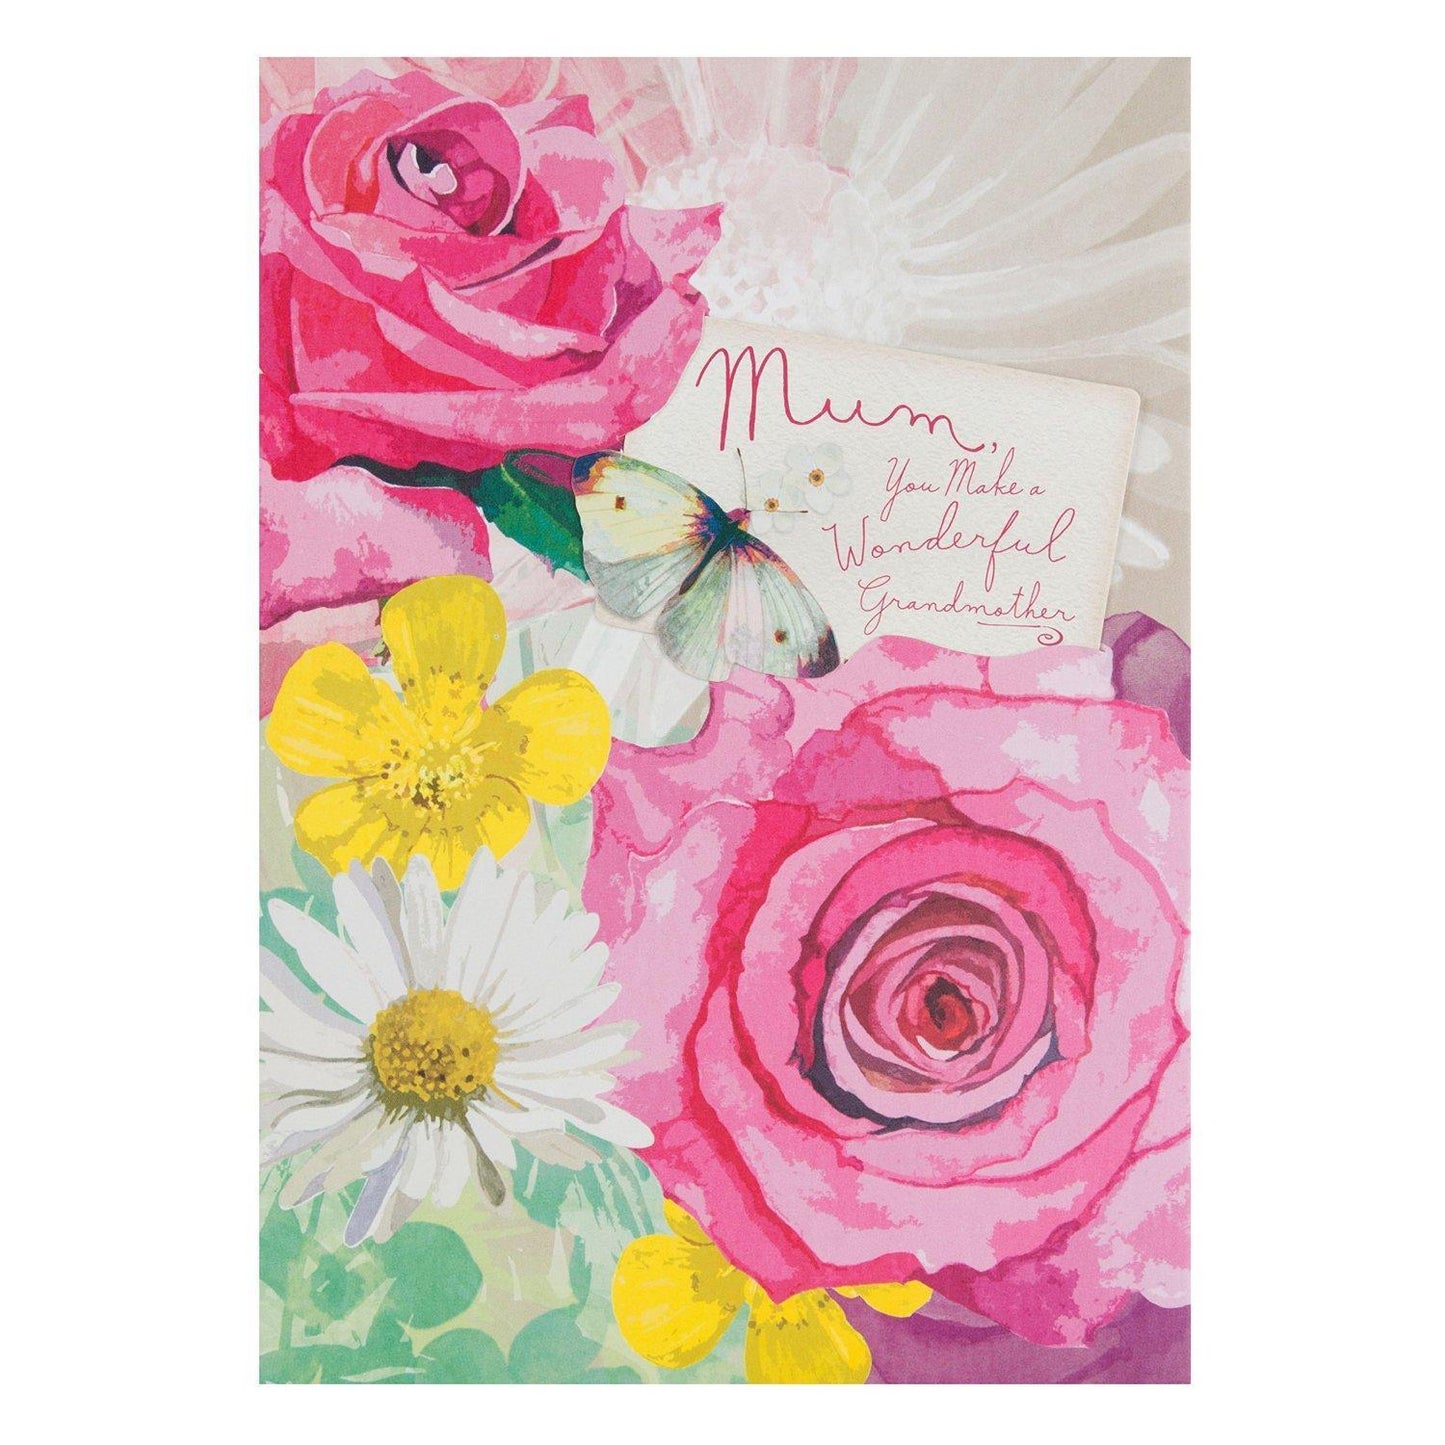 For Mum 'Wonderful Grandmother' Mother's Day Card